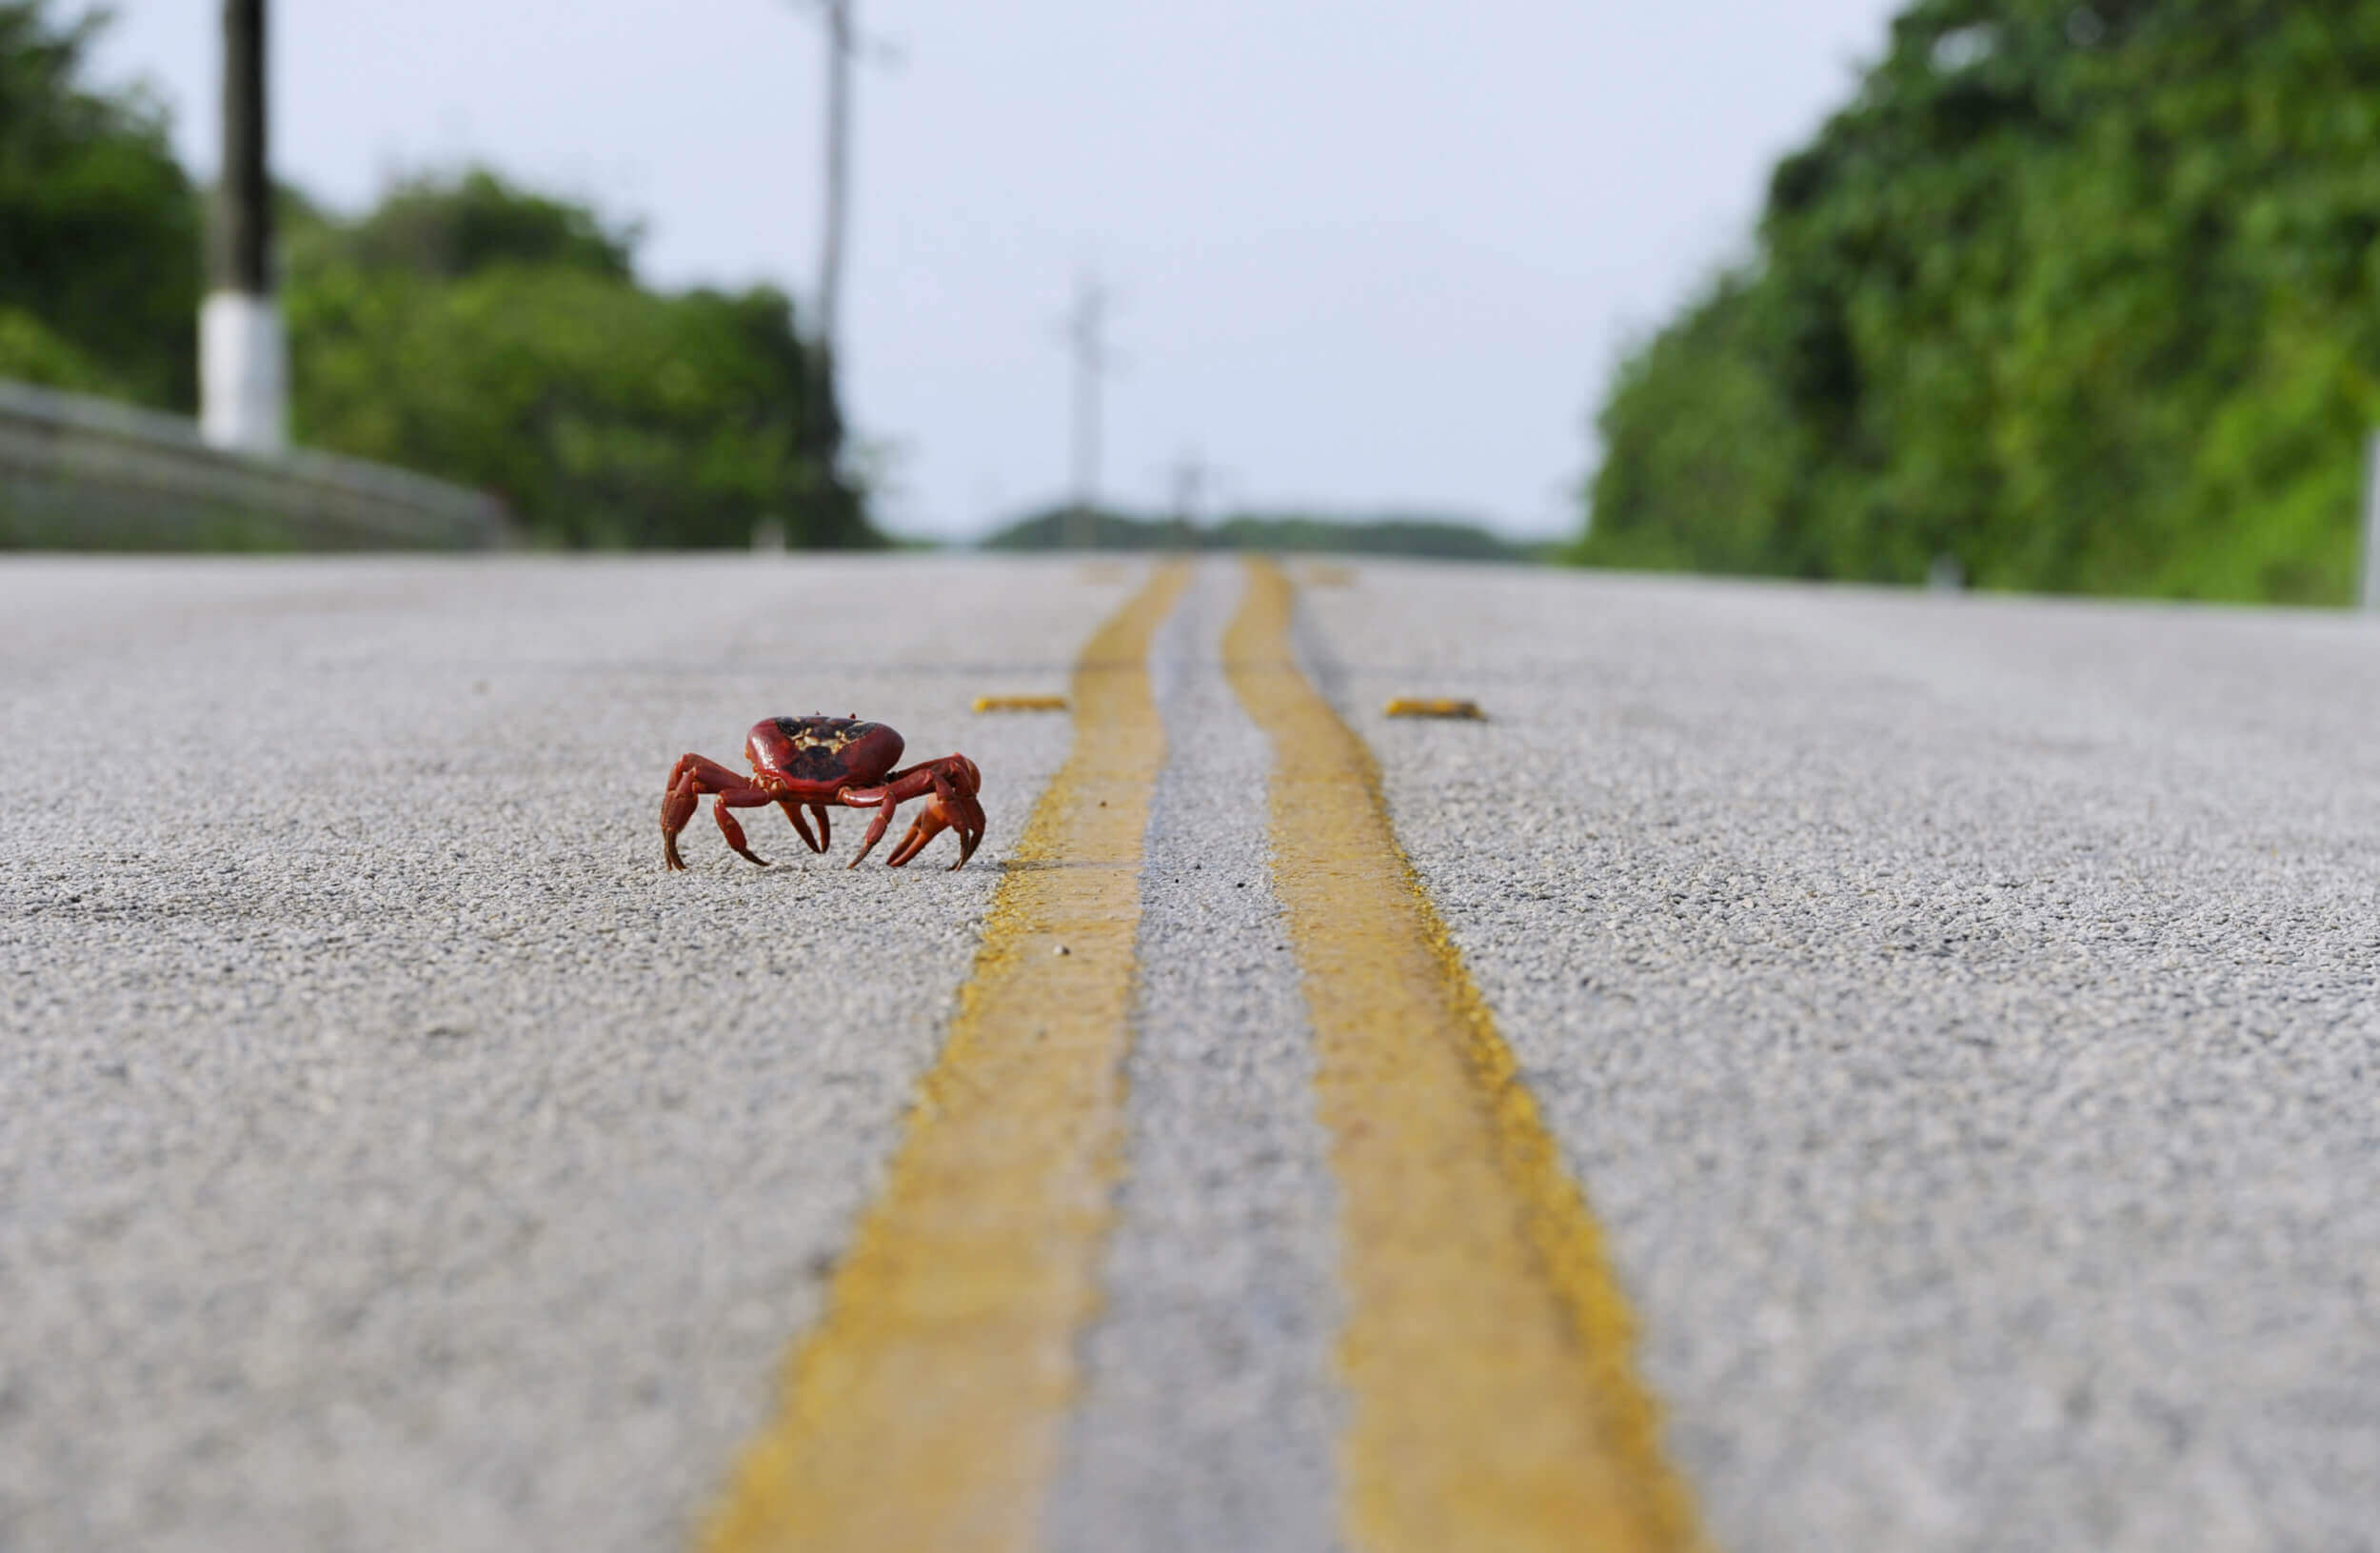 Man Designs Special Vehicle Device to Prevent Squishing Crabs